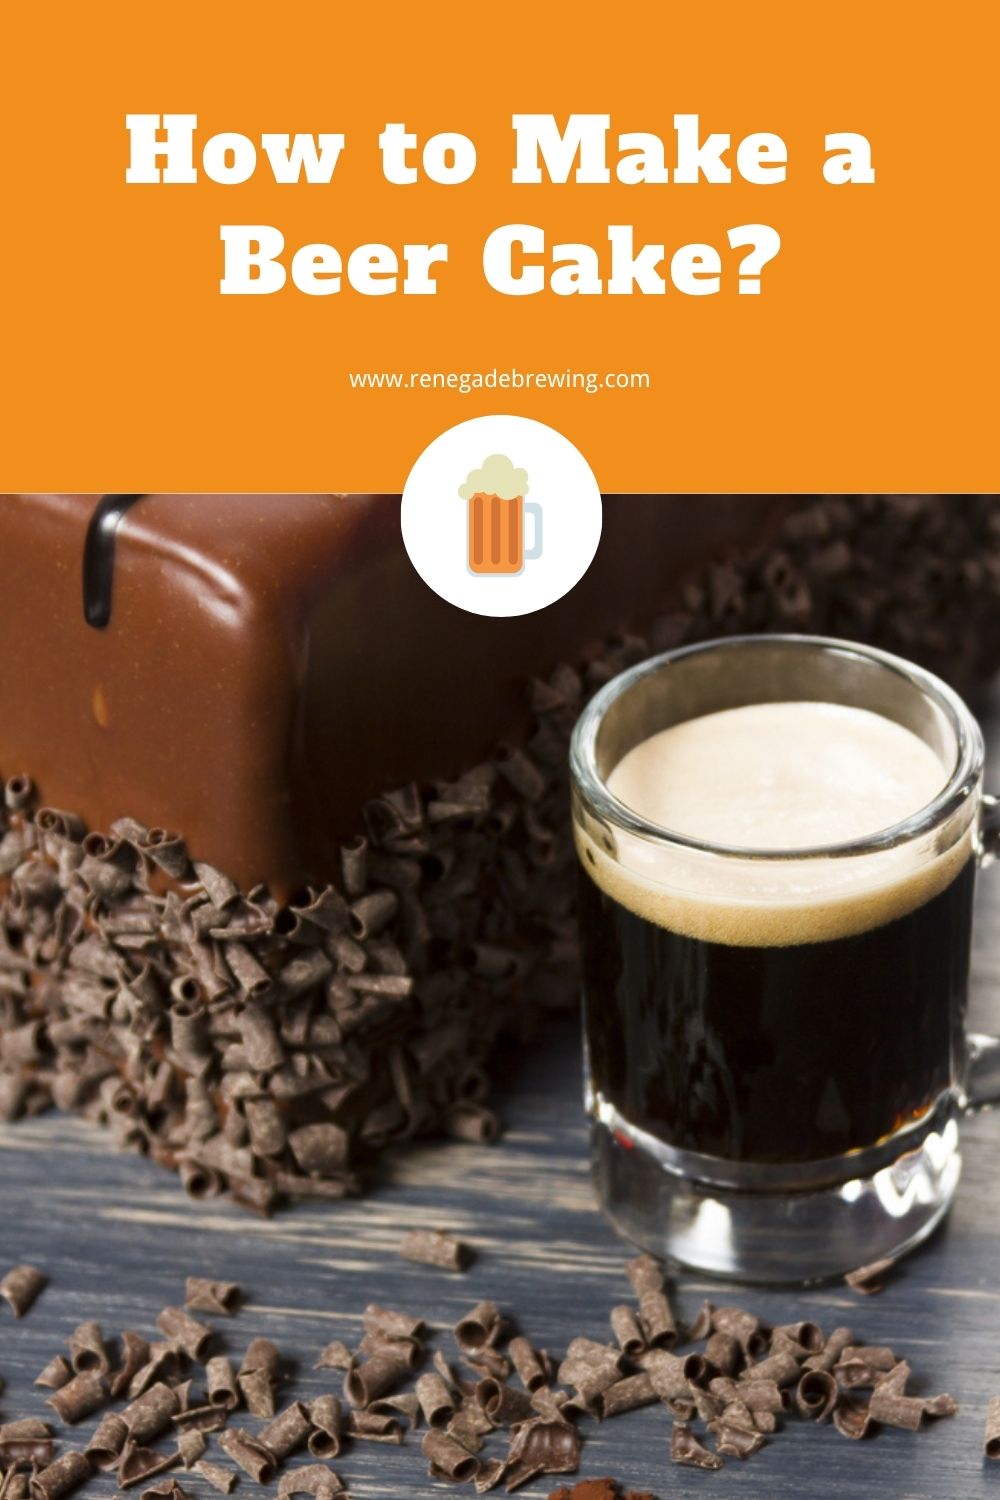 How to Make a Beer Cake (Step by Step Guides) 1